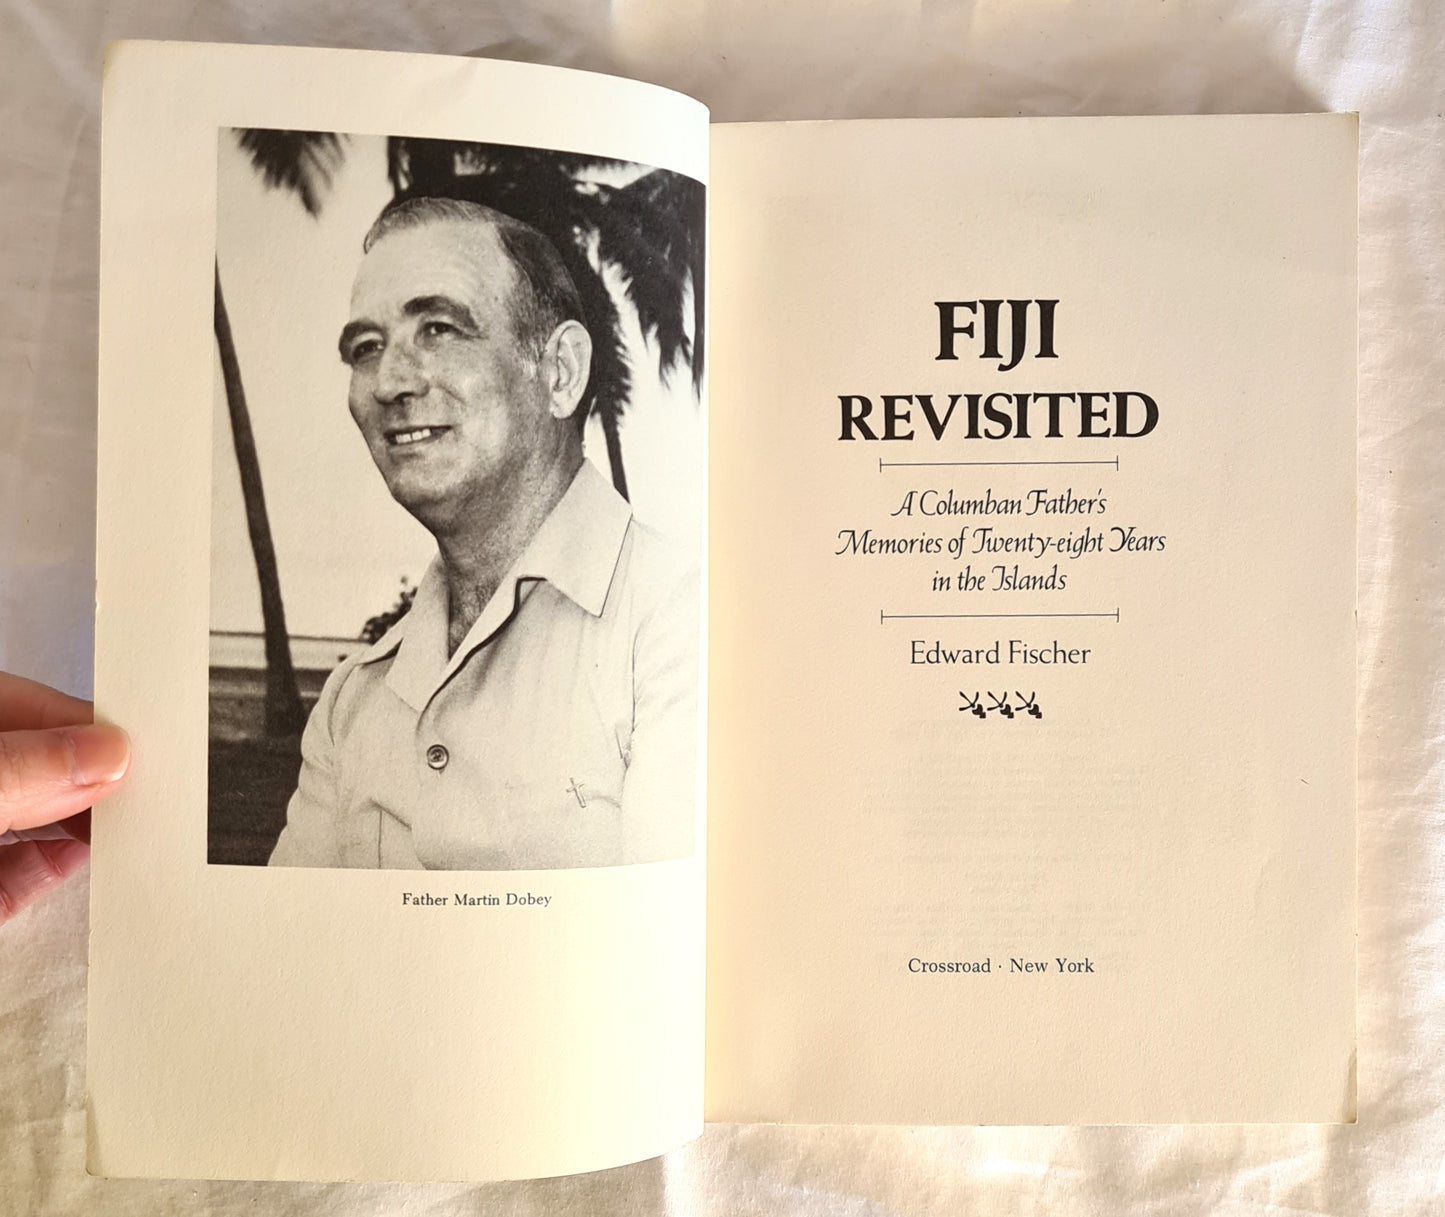 Fiji Revisited  A Columban Father’s Memories of Twenty-eight Years in the Islands  by Edward Fischer